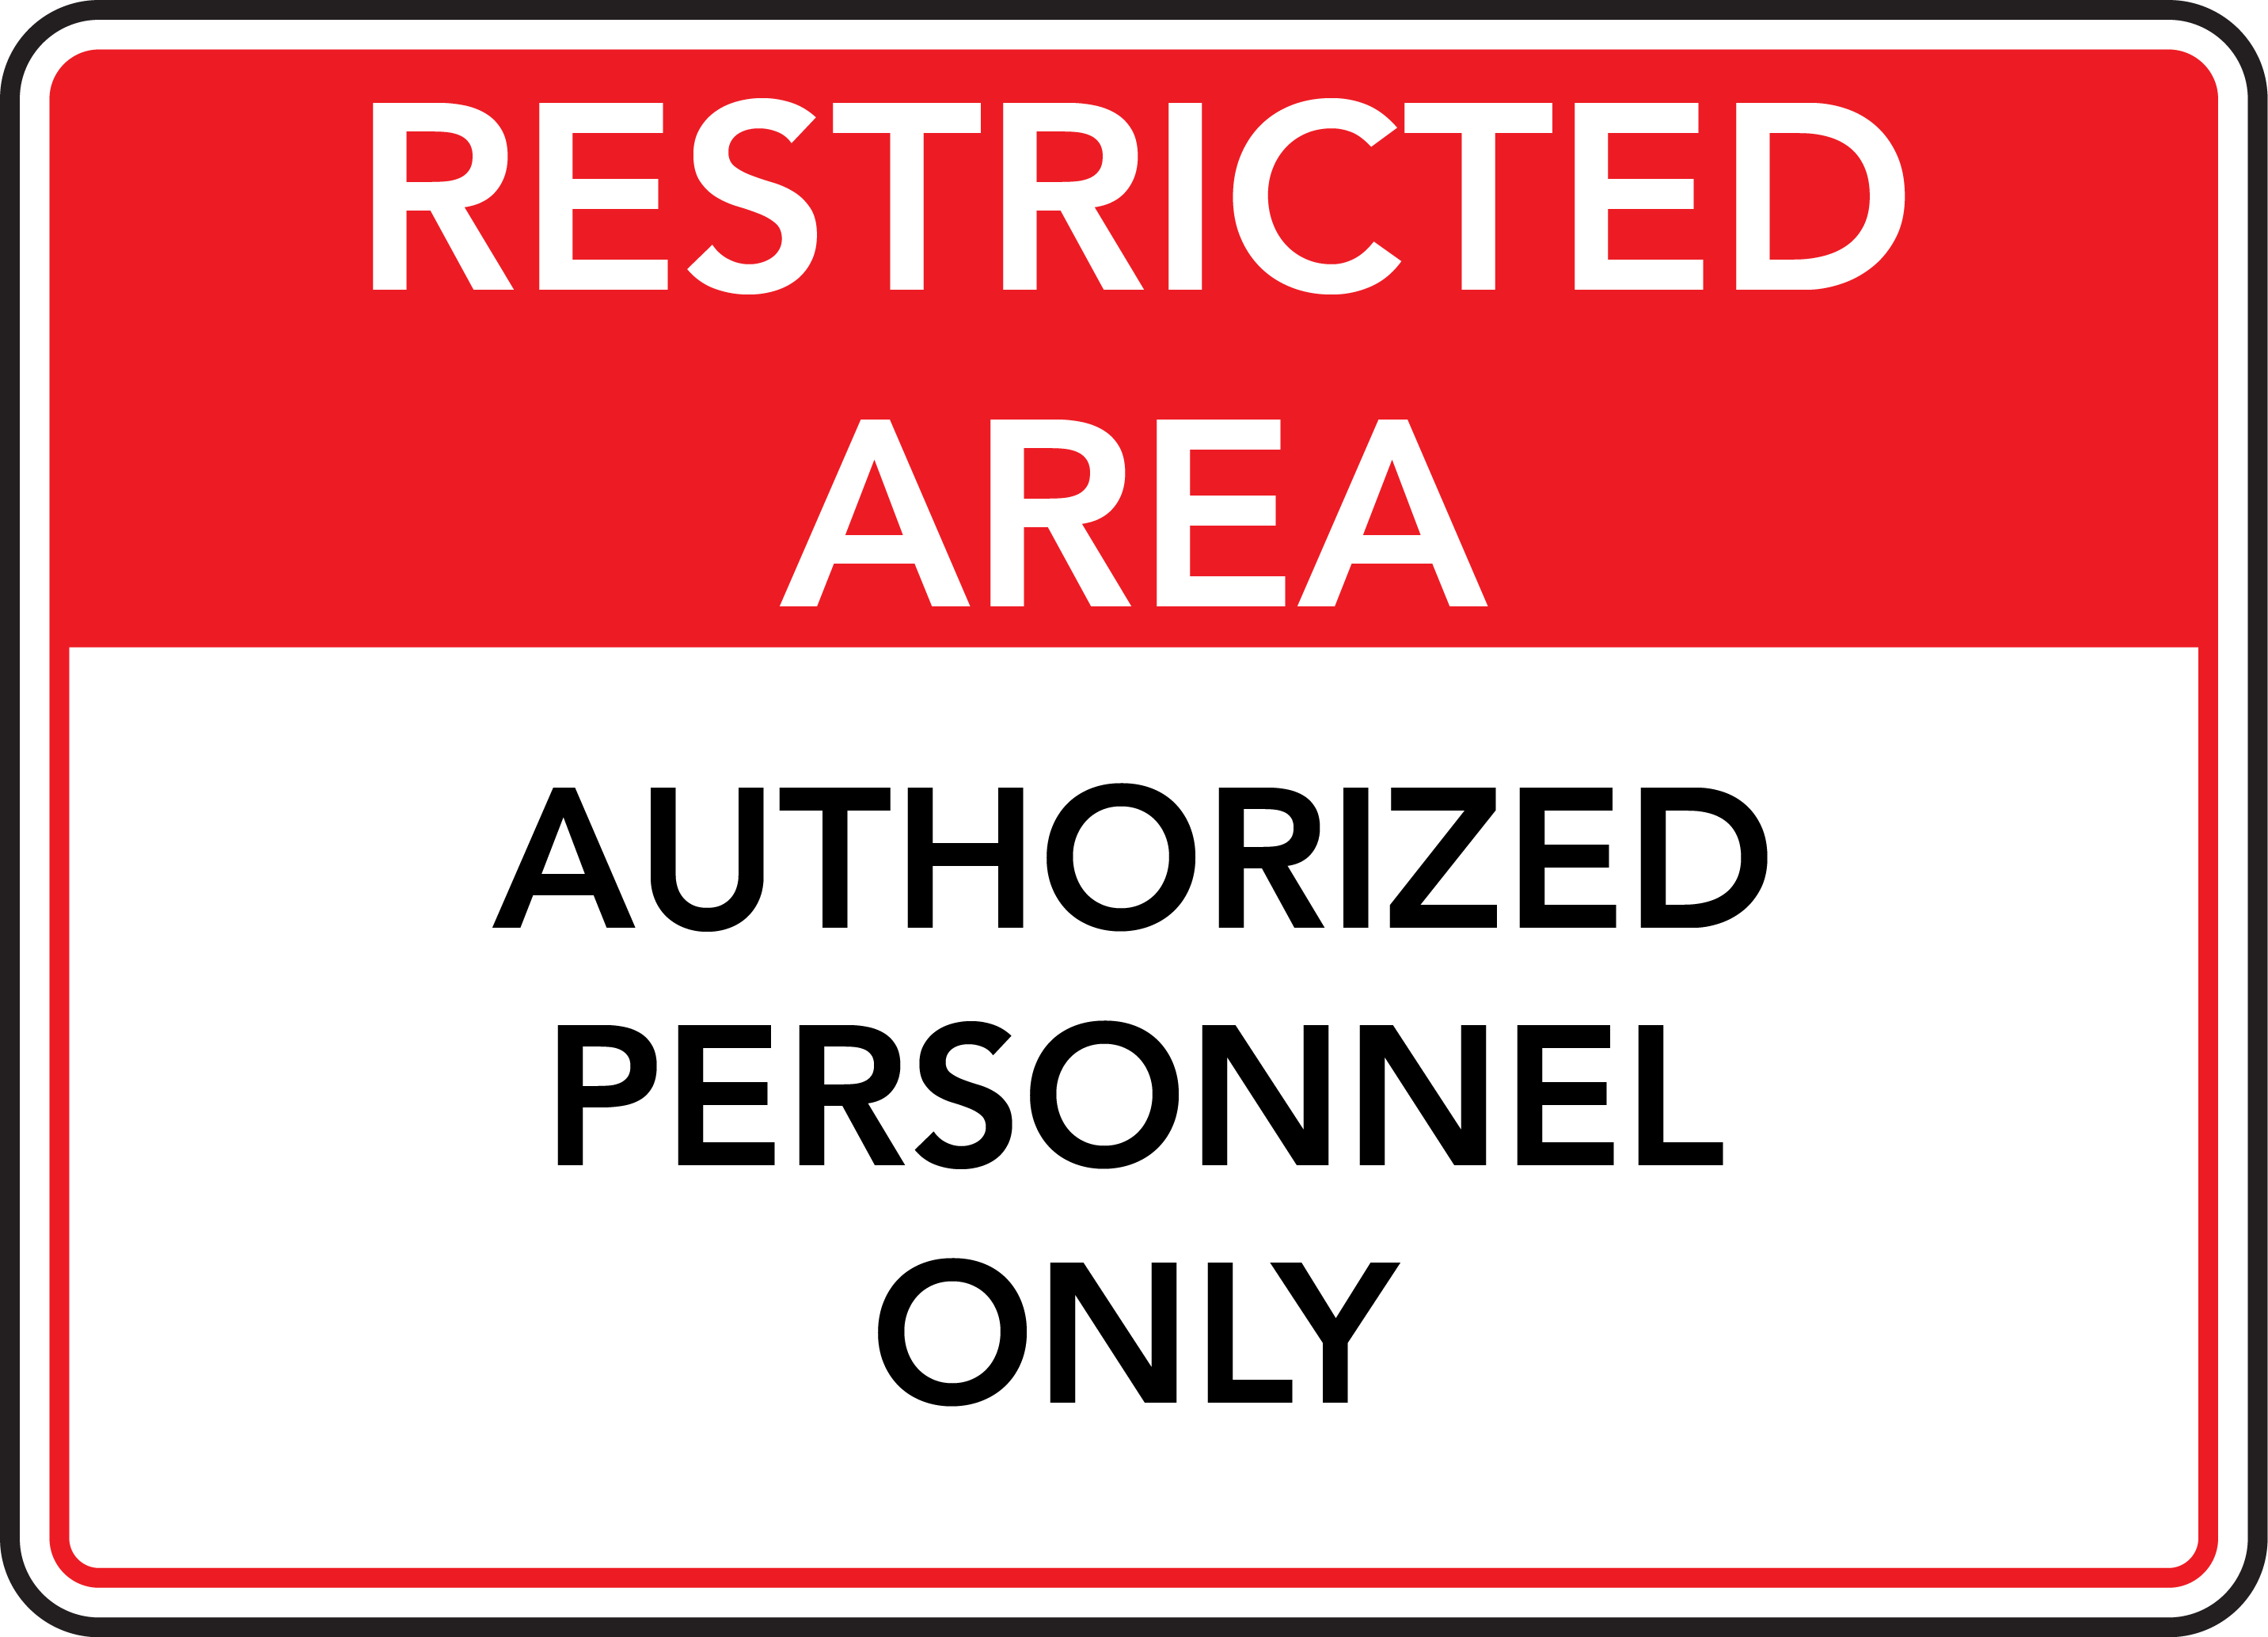 authorized-personnel-only-sign-wisc-online-oer